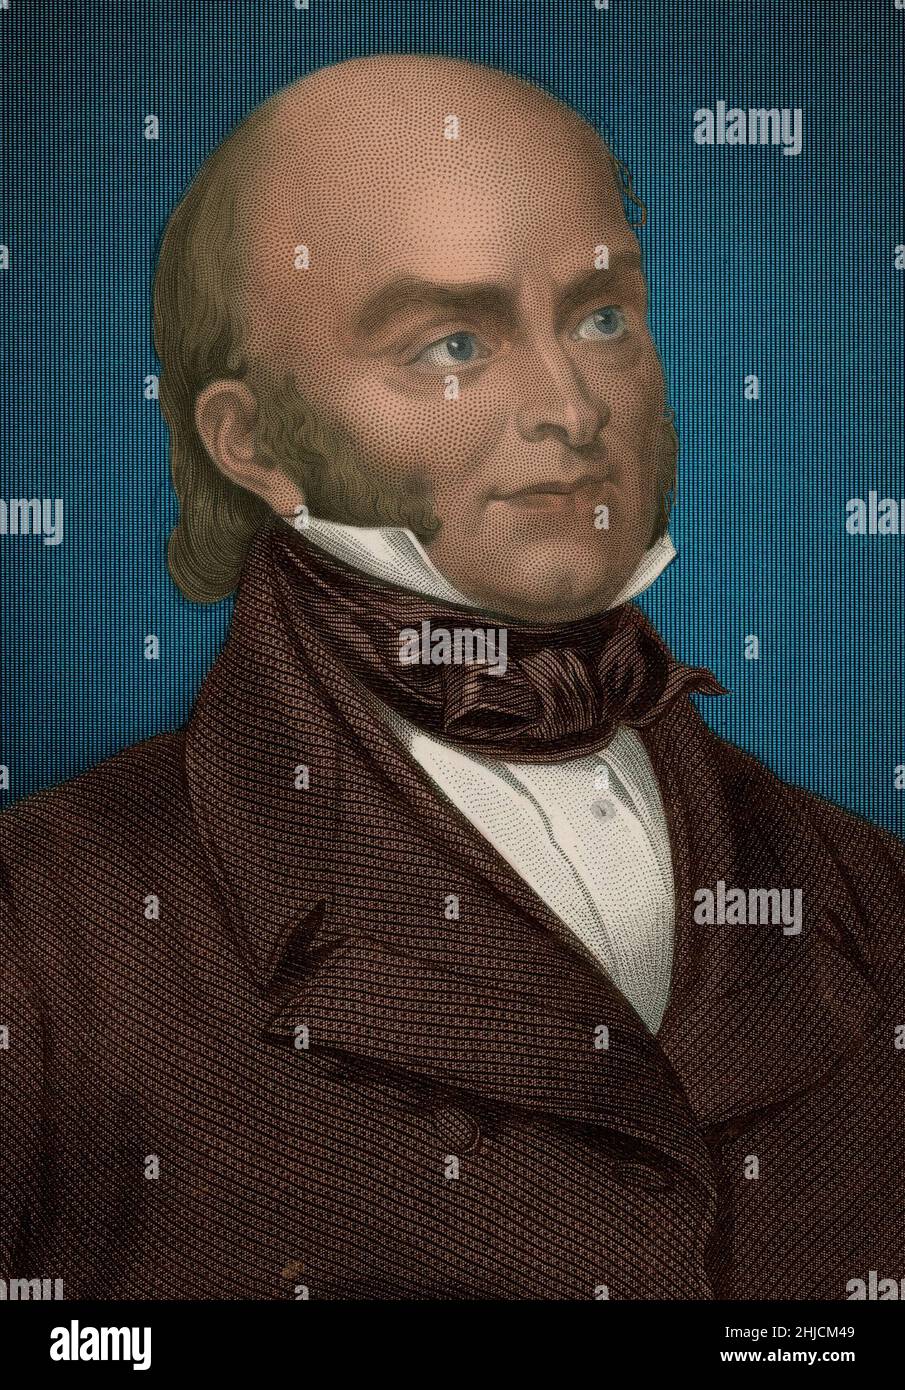 John Quincy Adams (1767 - 1848) was the sixth American President (1825-29). He was also diplomat and served in both the Senate and House of Representatives. Steel engraving by T.W. Hunt after portrait by Savinien E. Dubourjal, circa 1850. Colorized. Stock Photo